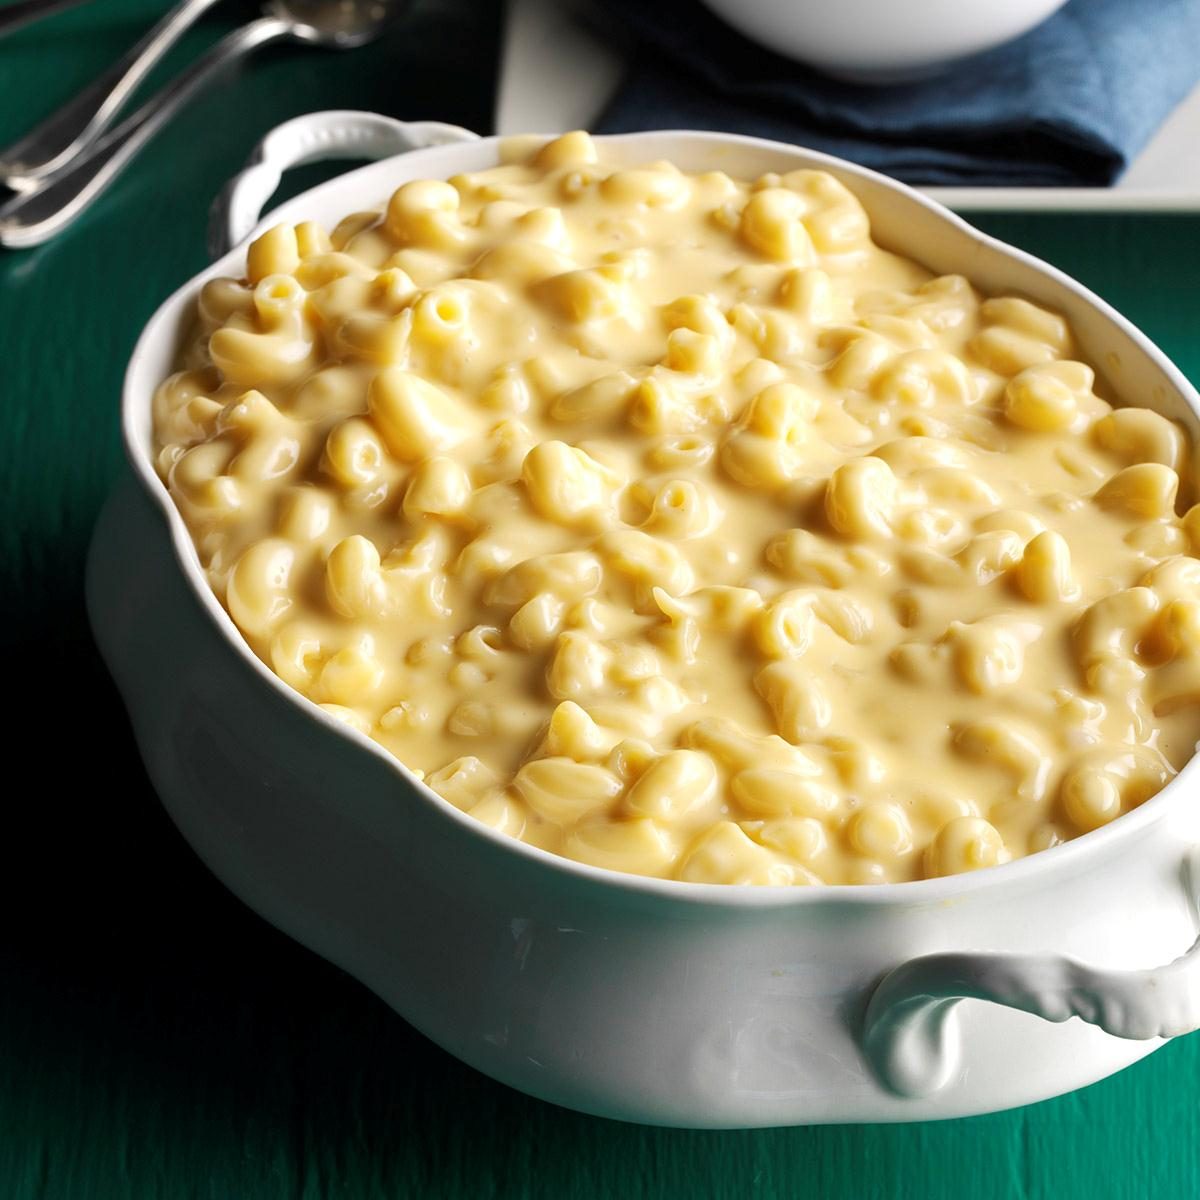 https://www.tasteofhome.com/wp-content/uploads/2018/01/Potluck-Macaroni-and-Cheese_EXPS_SDON16_41117_C06_07_9b-8.jpg?fit=700%2C1024